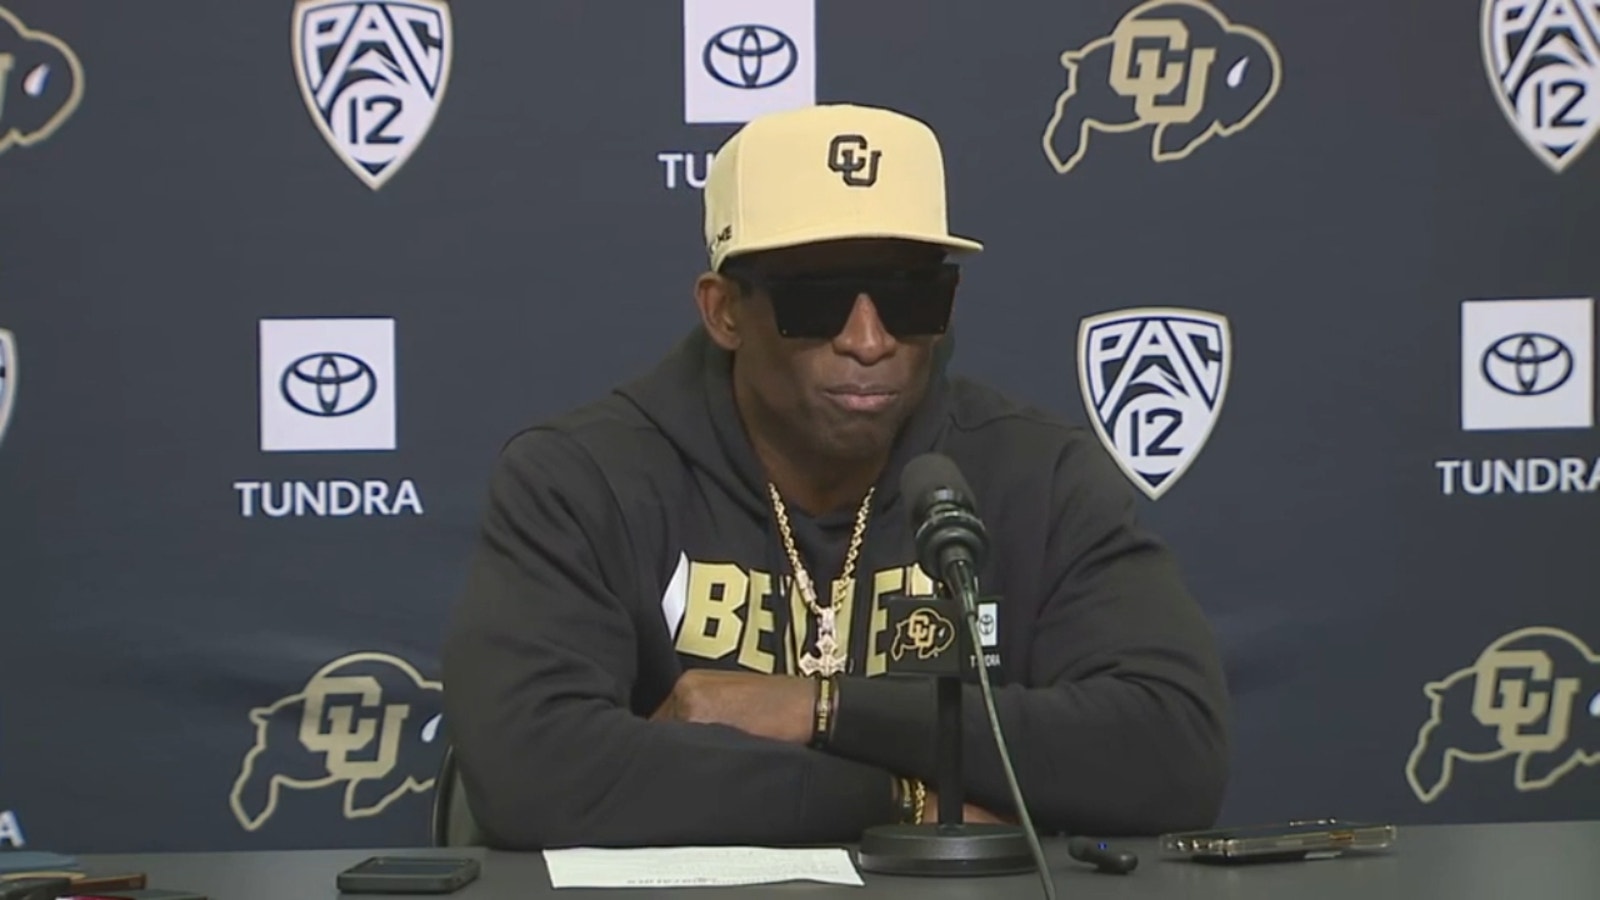 News conference: Deion Sanders provides updates during USC week and responds to haters after loss